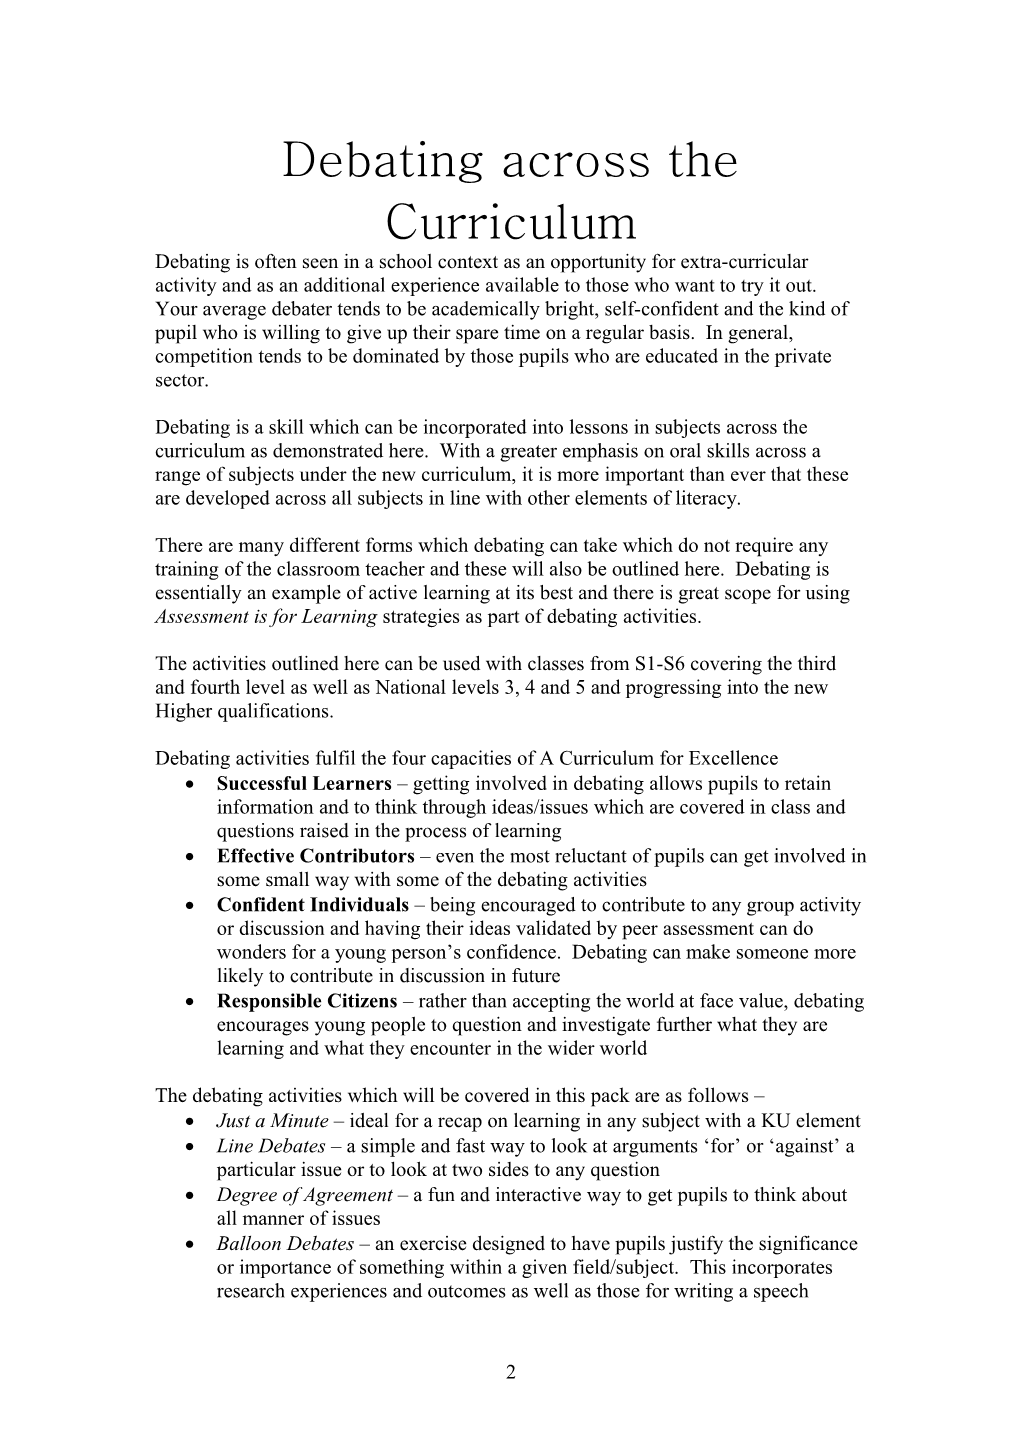 Curriculum for Excellence: Literacy Across Learning - Debating Across the Curriculum